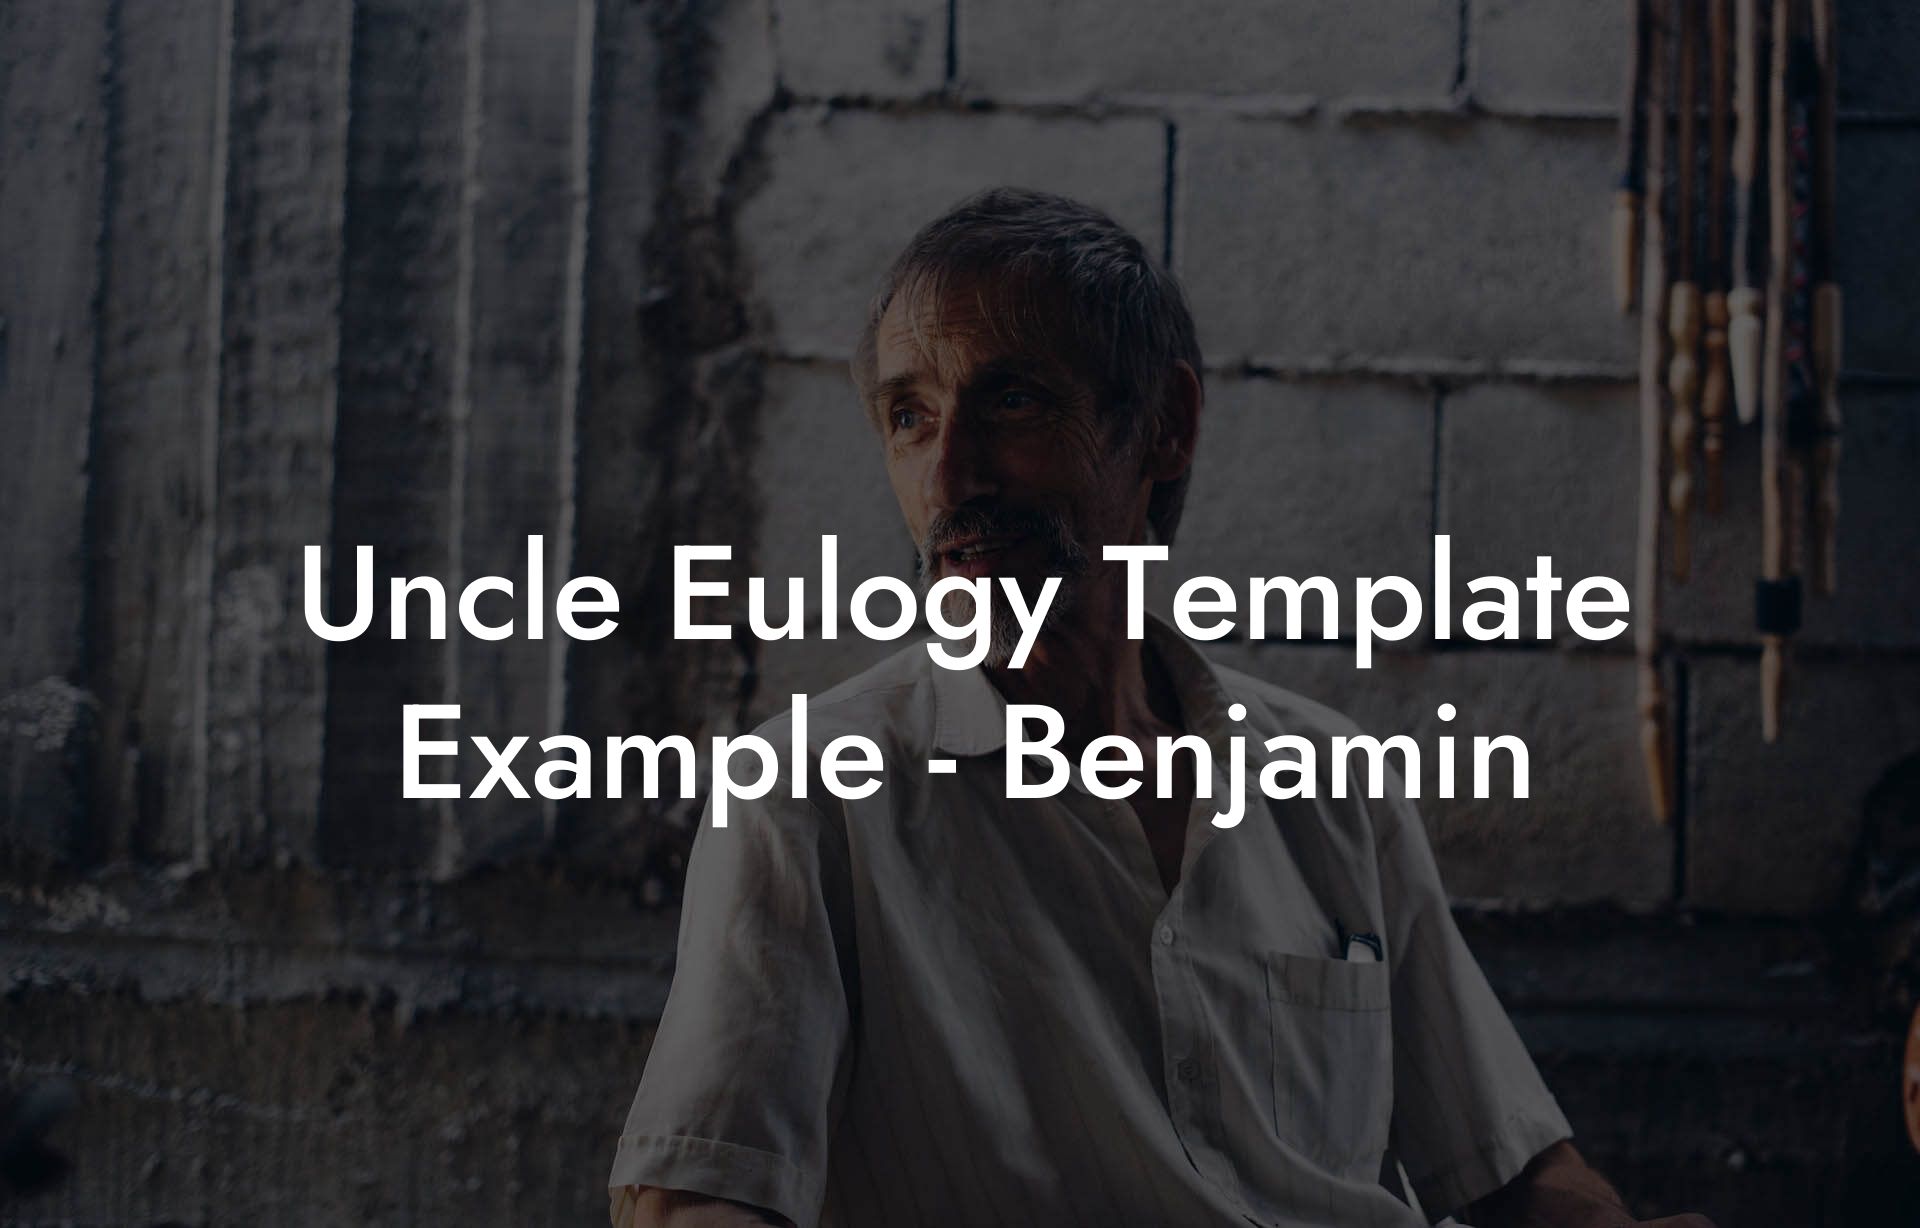 Uncle Eulogy Template Example - Benjamin